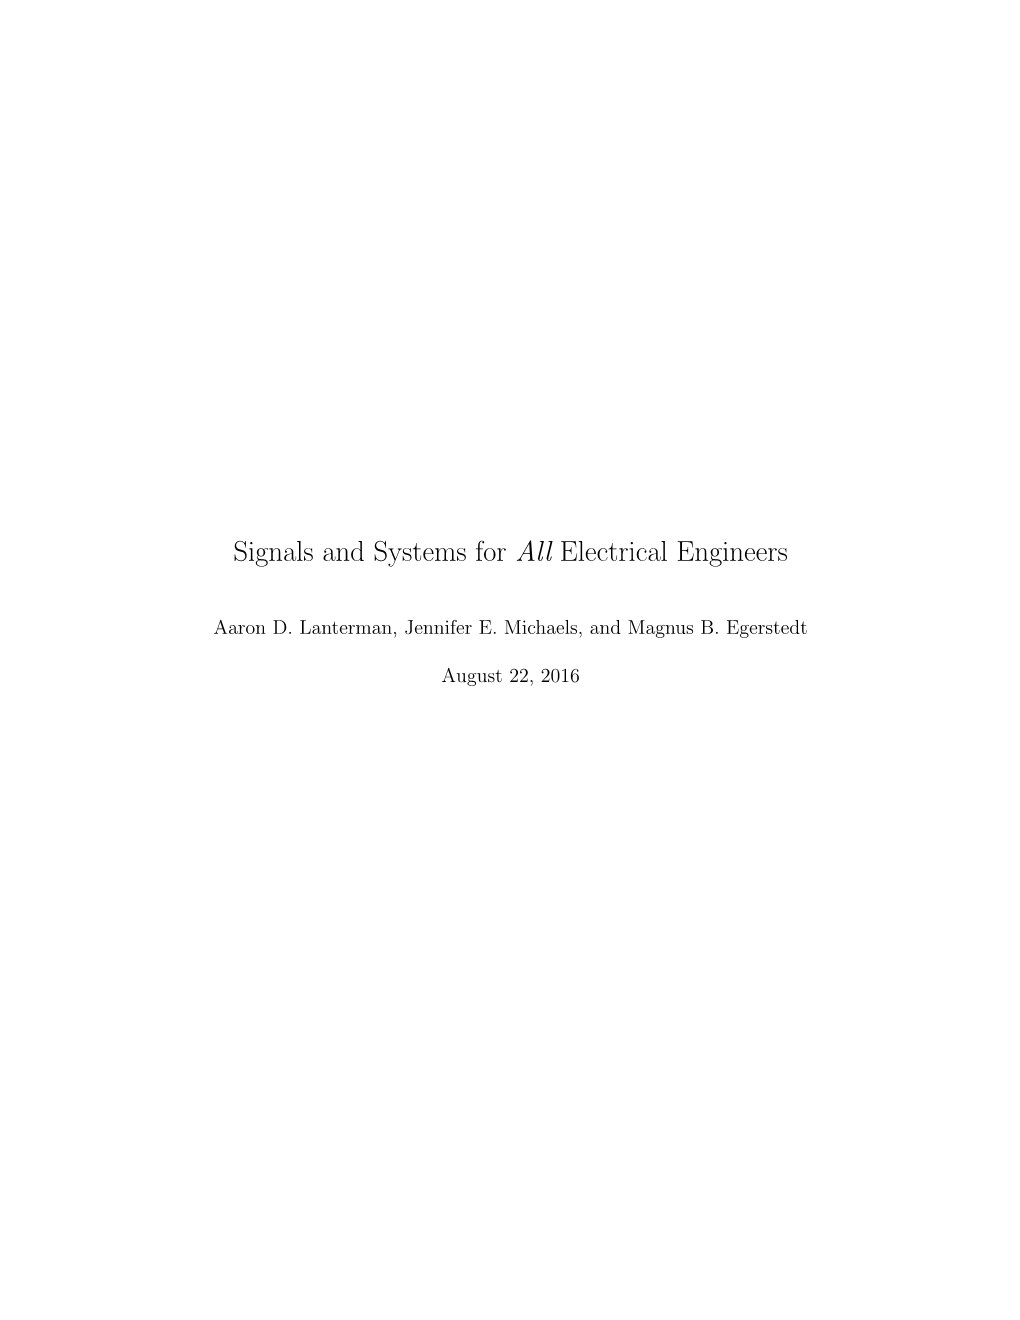 Signals and Systems for All Electrical Engineers